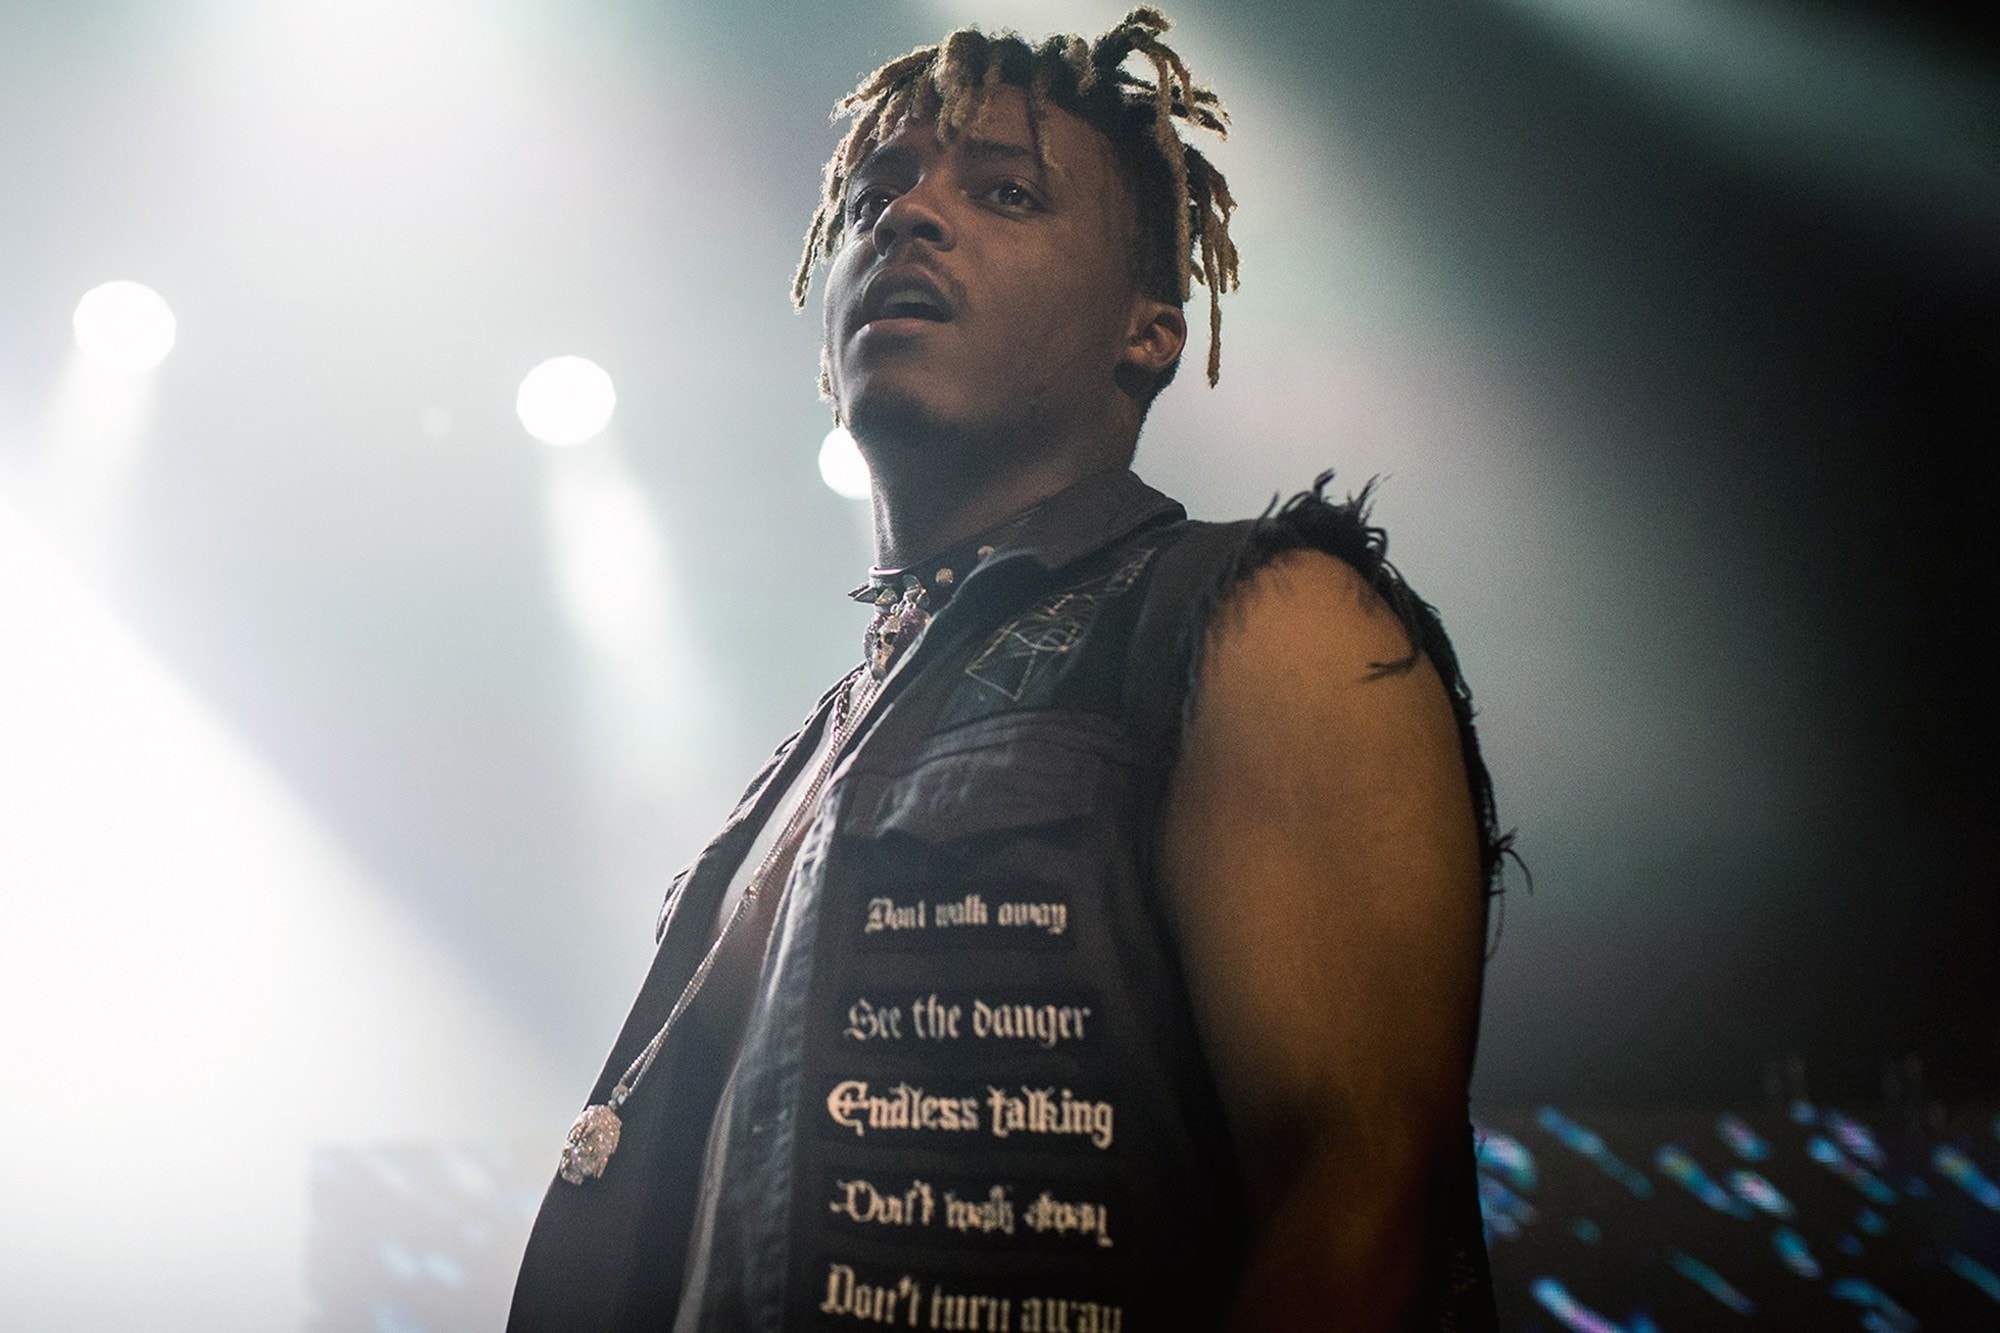 Juice WRLD Mom Writes Letter on World Mental Health Day HYPEBEAST Music News Live Free 999 Org Mental Health Issues Rest In Peace RIP Legends Never Die Death Race for Love Future 